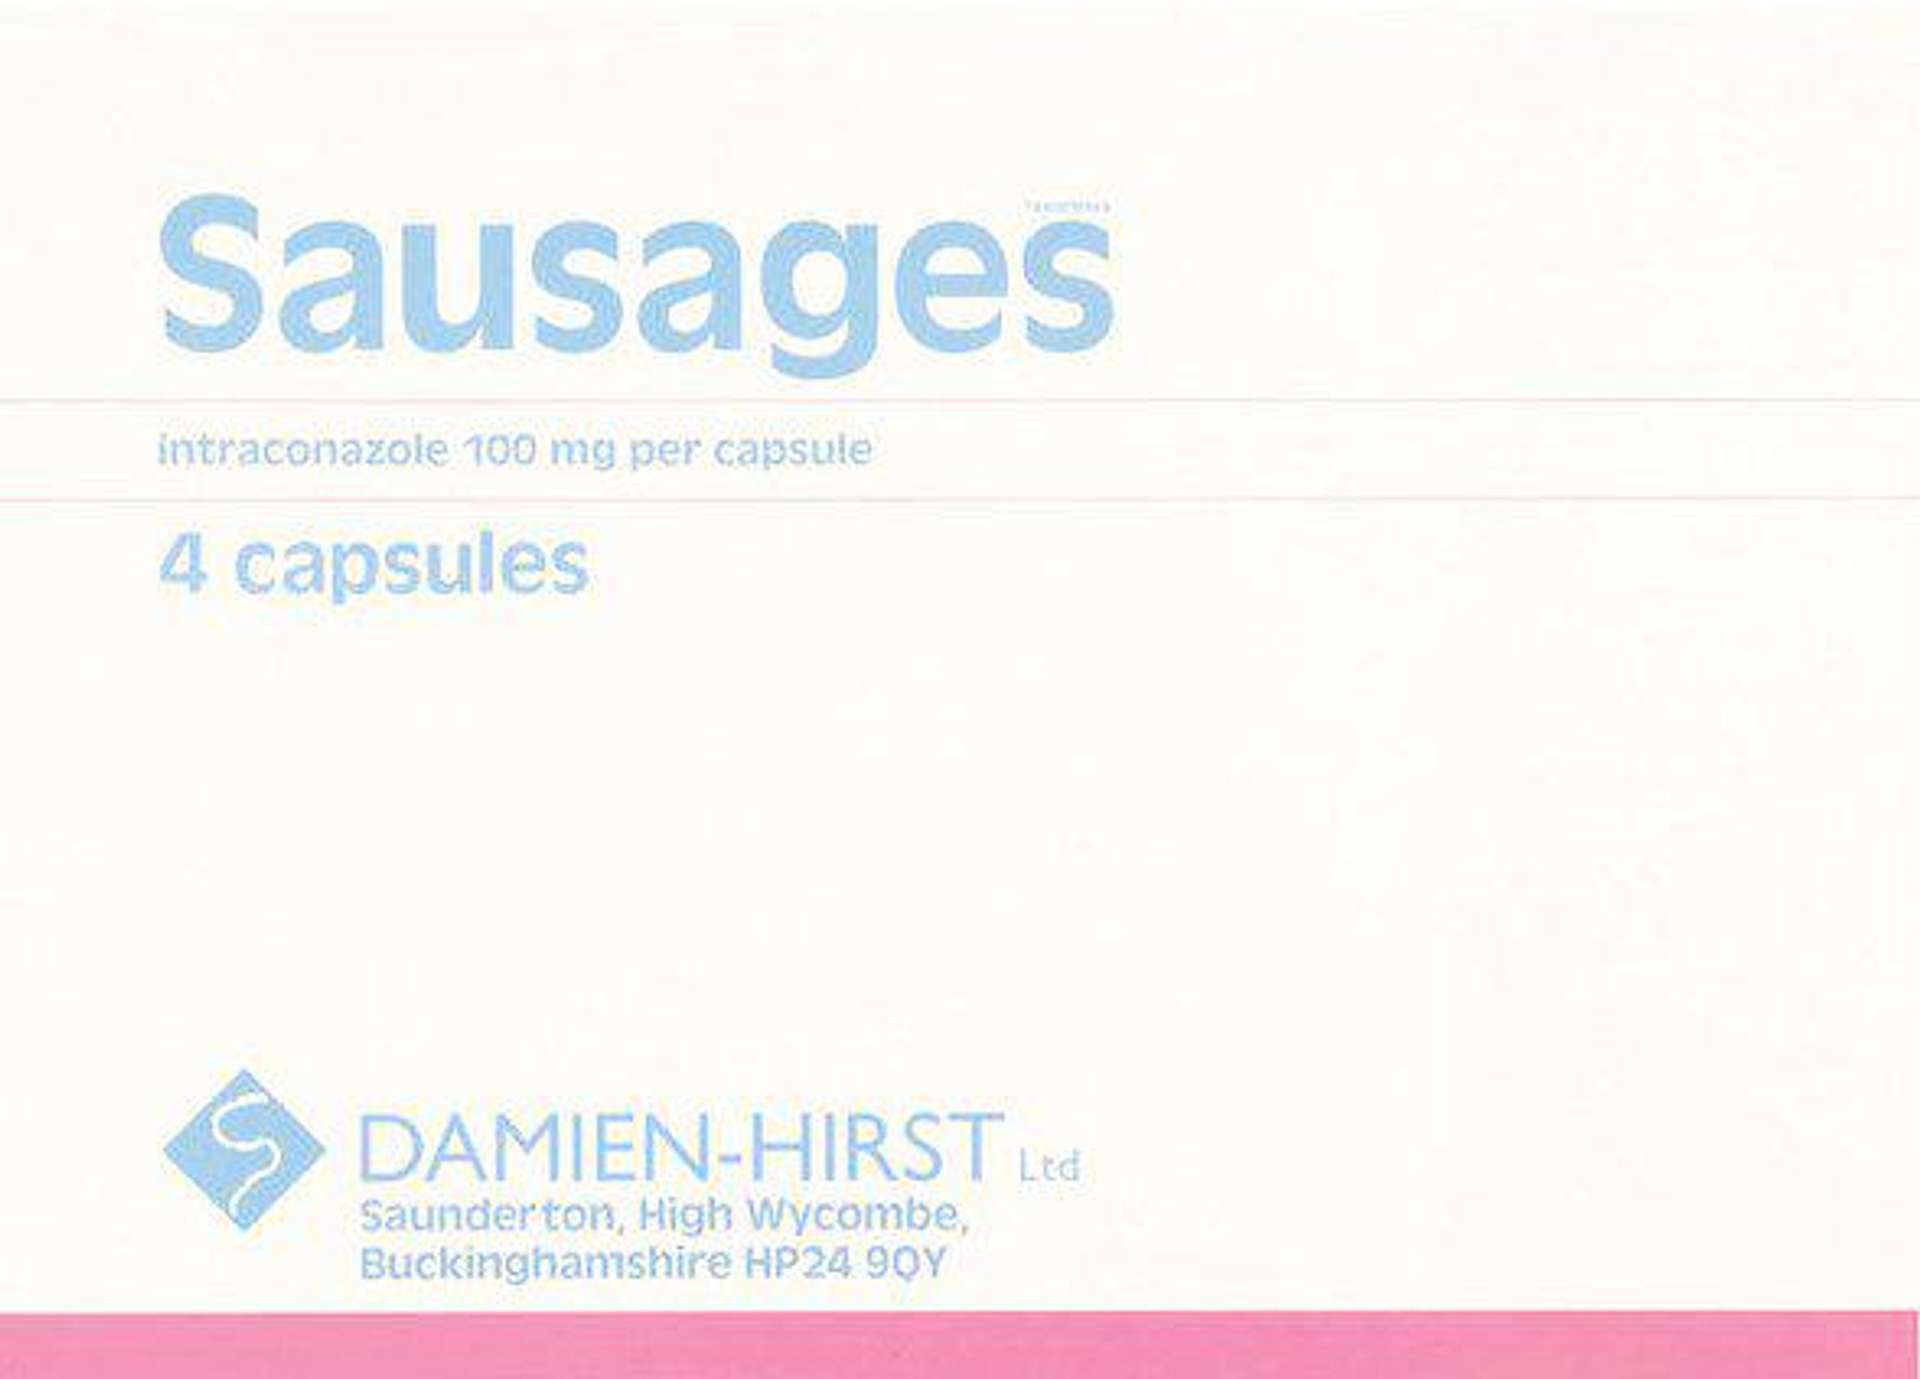 Damien Hirst’s Sausages. A screenprint of a white pharmaceutical box with the text “Sausages”. 